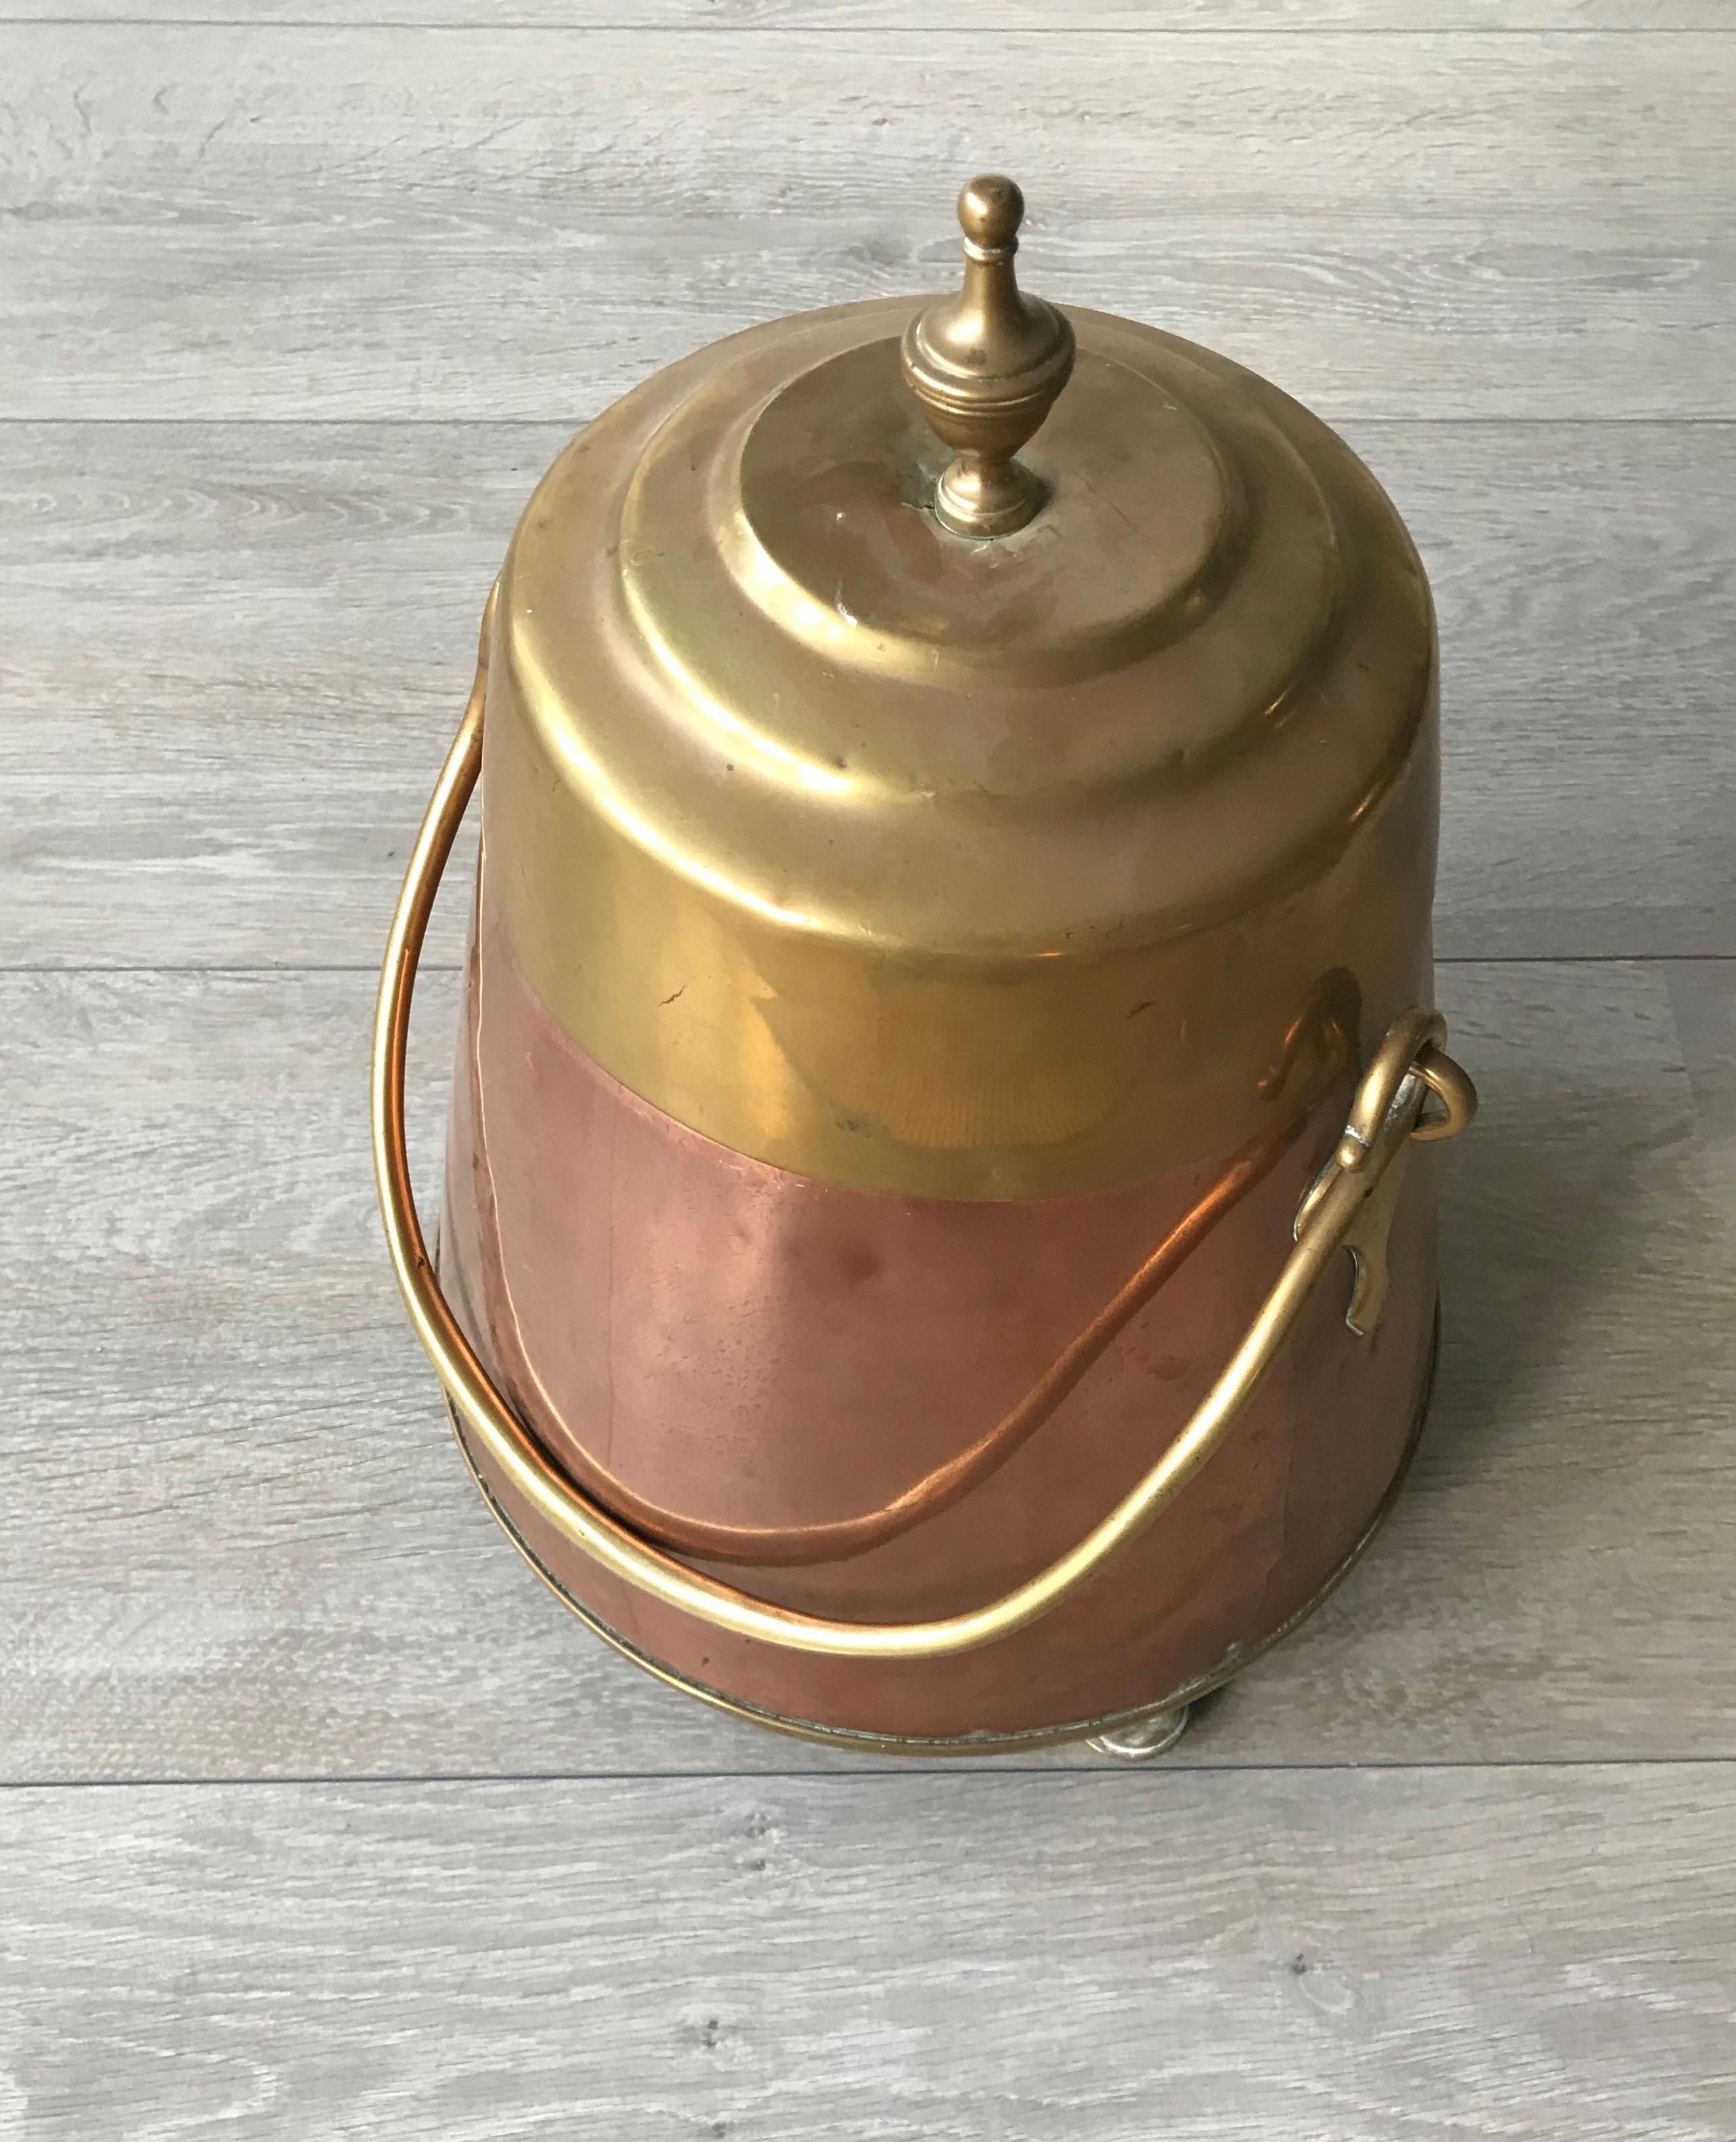 An elegant and very decorative copper fire place tool from the 1800s.

This handcrafted, copper and brass kettle could only be afforded by the very well-to-do in the 1800s in Europe and in the Netherlands in particular. It would have taken a highly